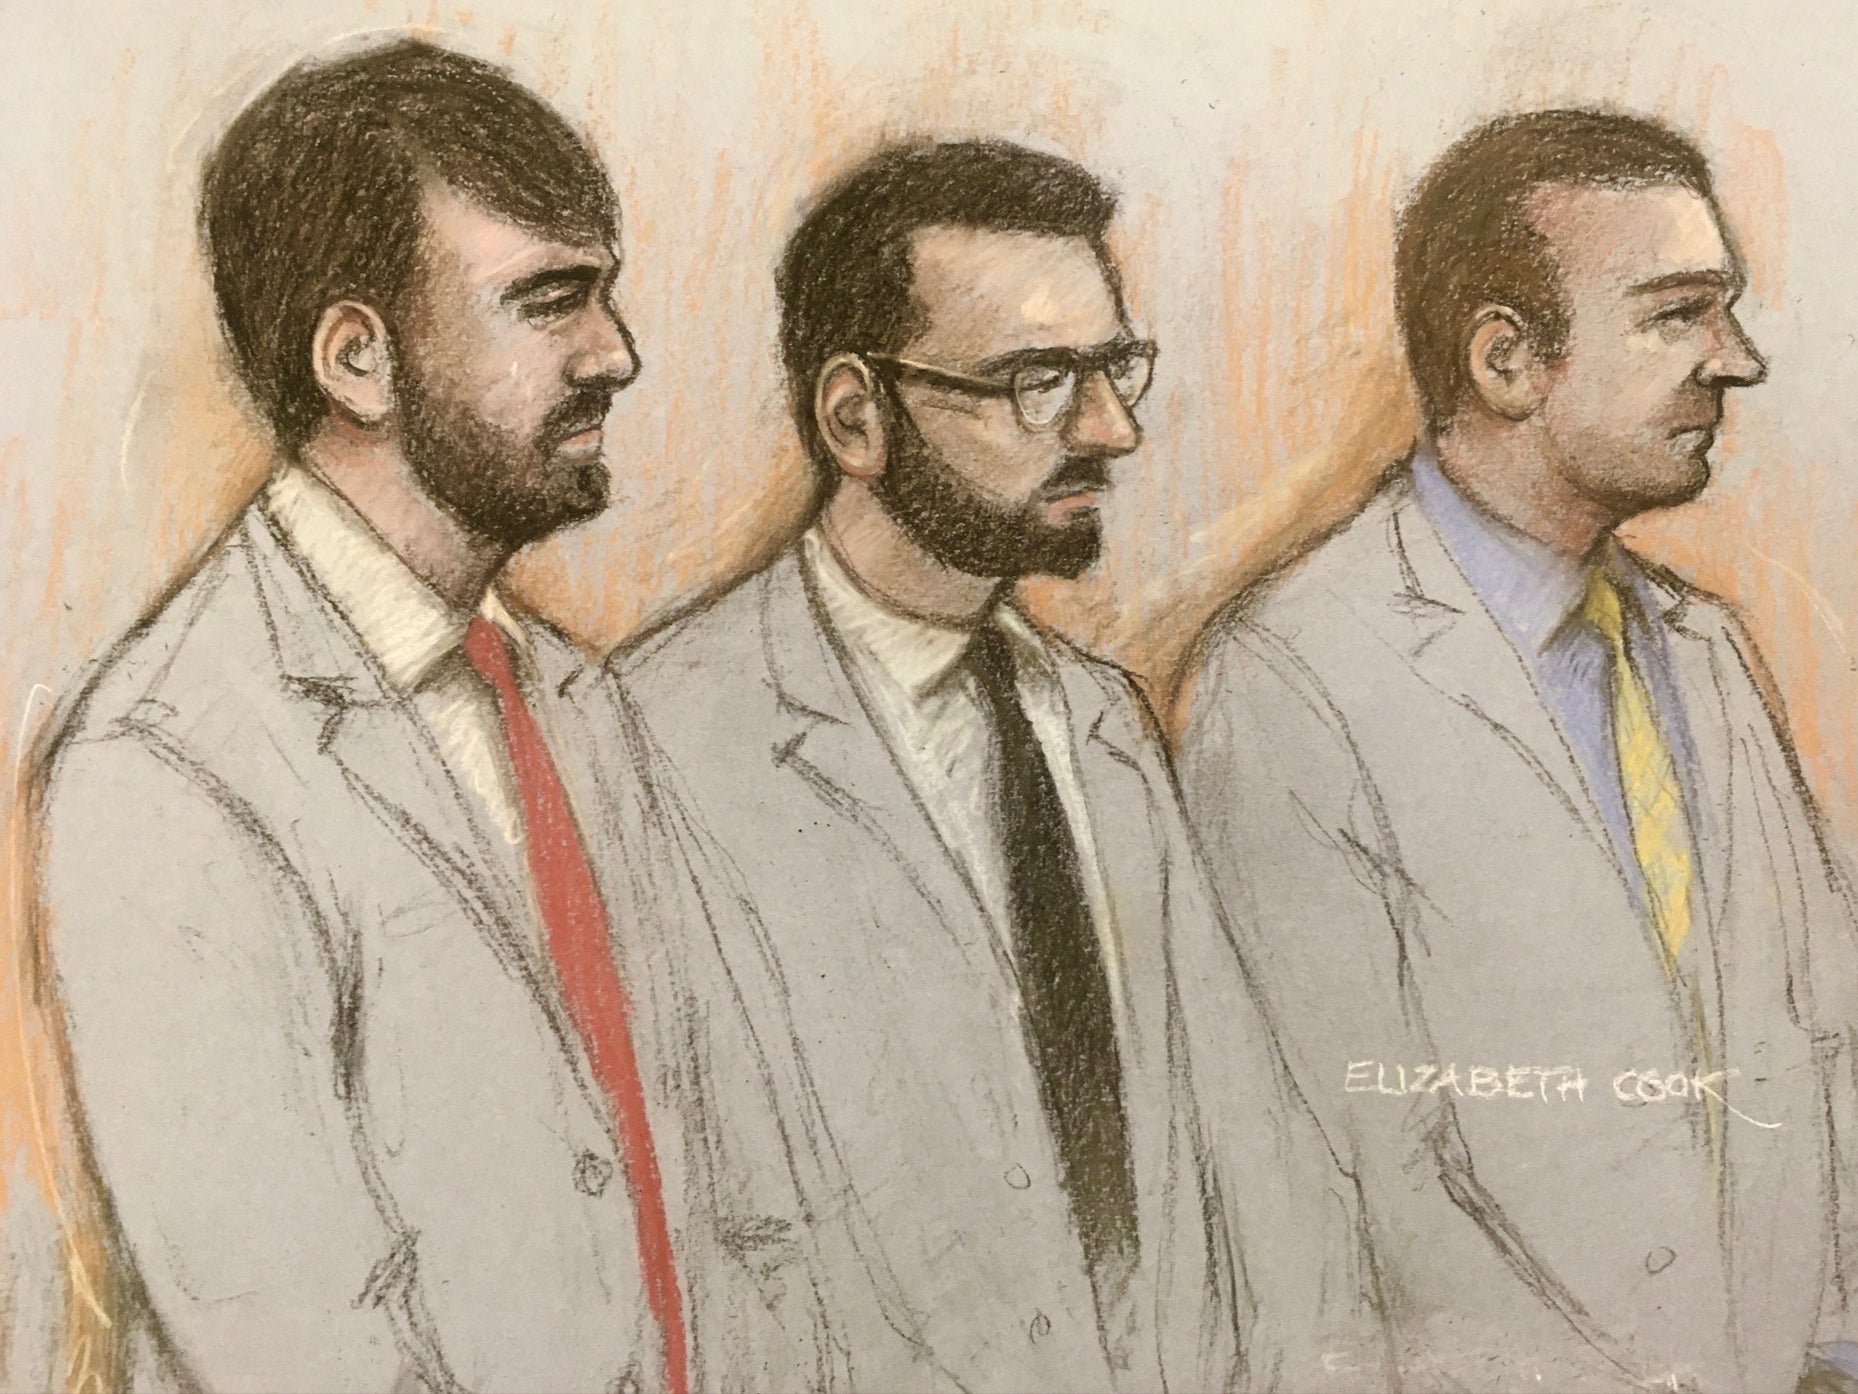 Court artist sketch of (left to right) William Neville, Jonathan Cobban and former police officer Joel Borders